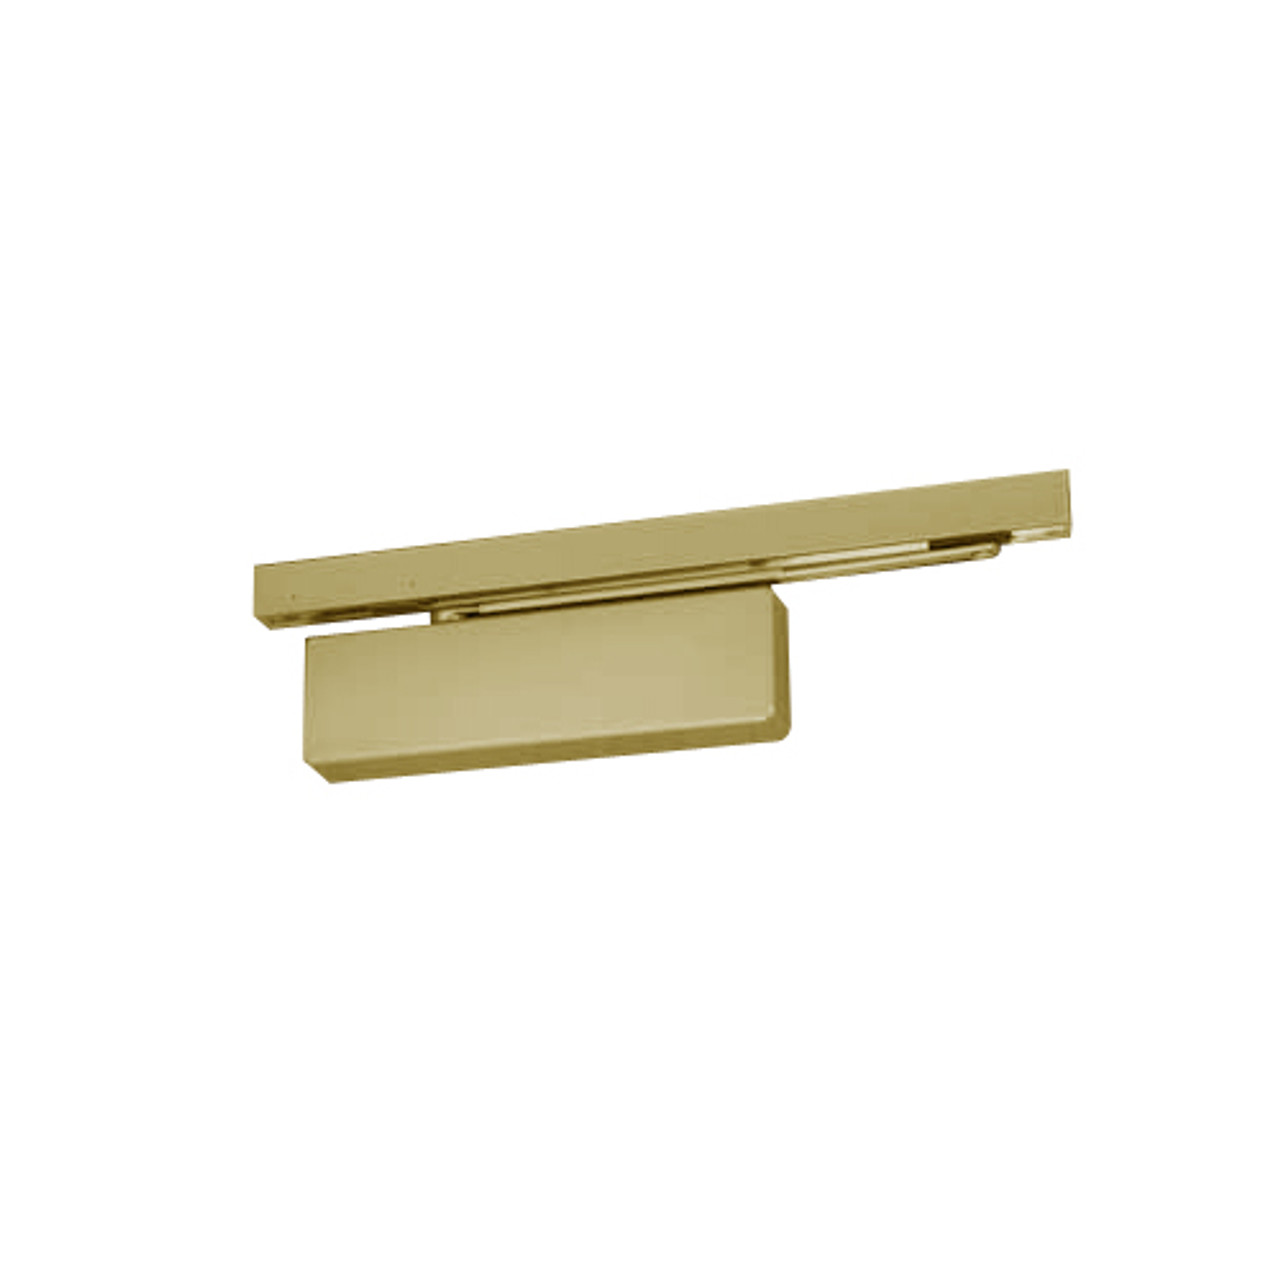 PS7500STH-DA-696 Norton 7500 Series Hold Open Institutional Door Closer with Push Side Slide Track in Gold Finish